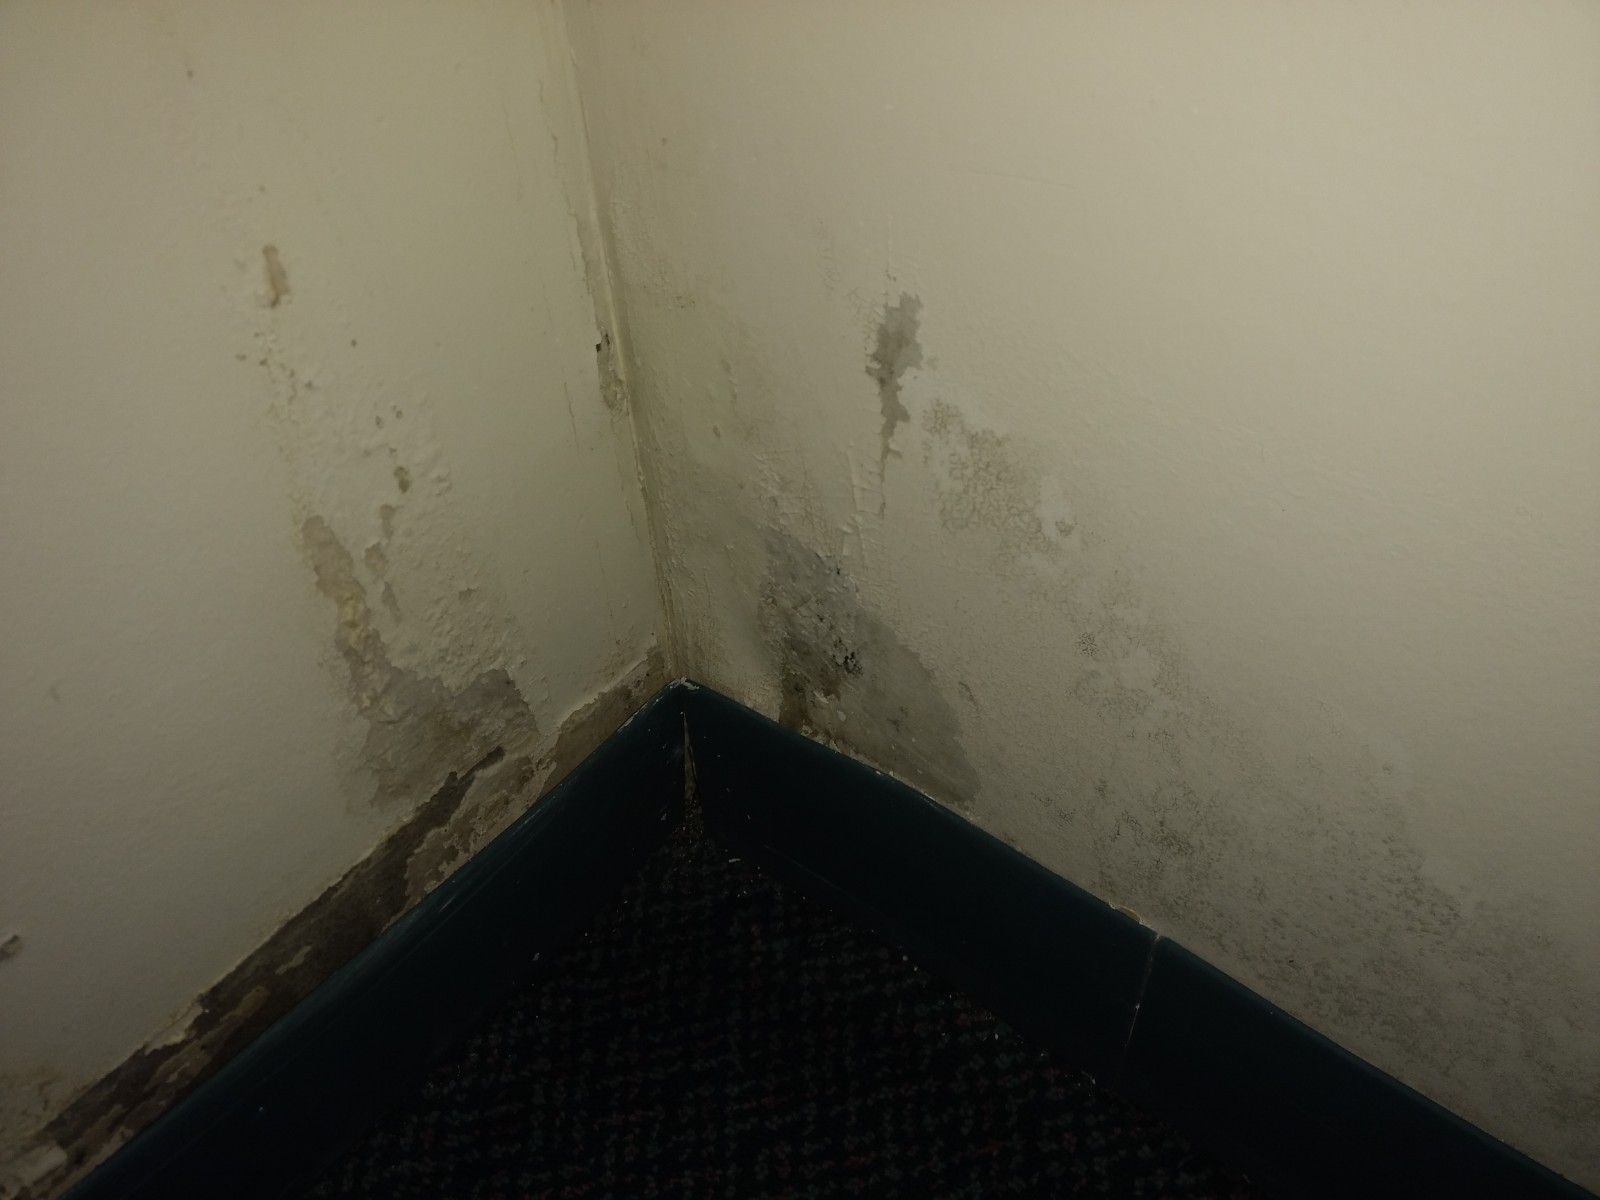 Mold remediation is one of many services that SERVPRO of Ebensburg provides. Call us today for an assessment of your mold damage.